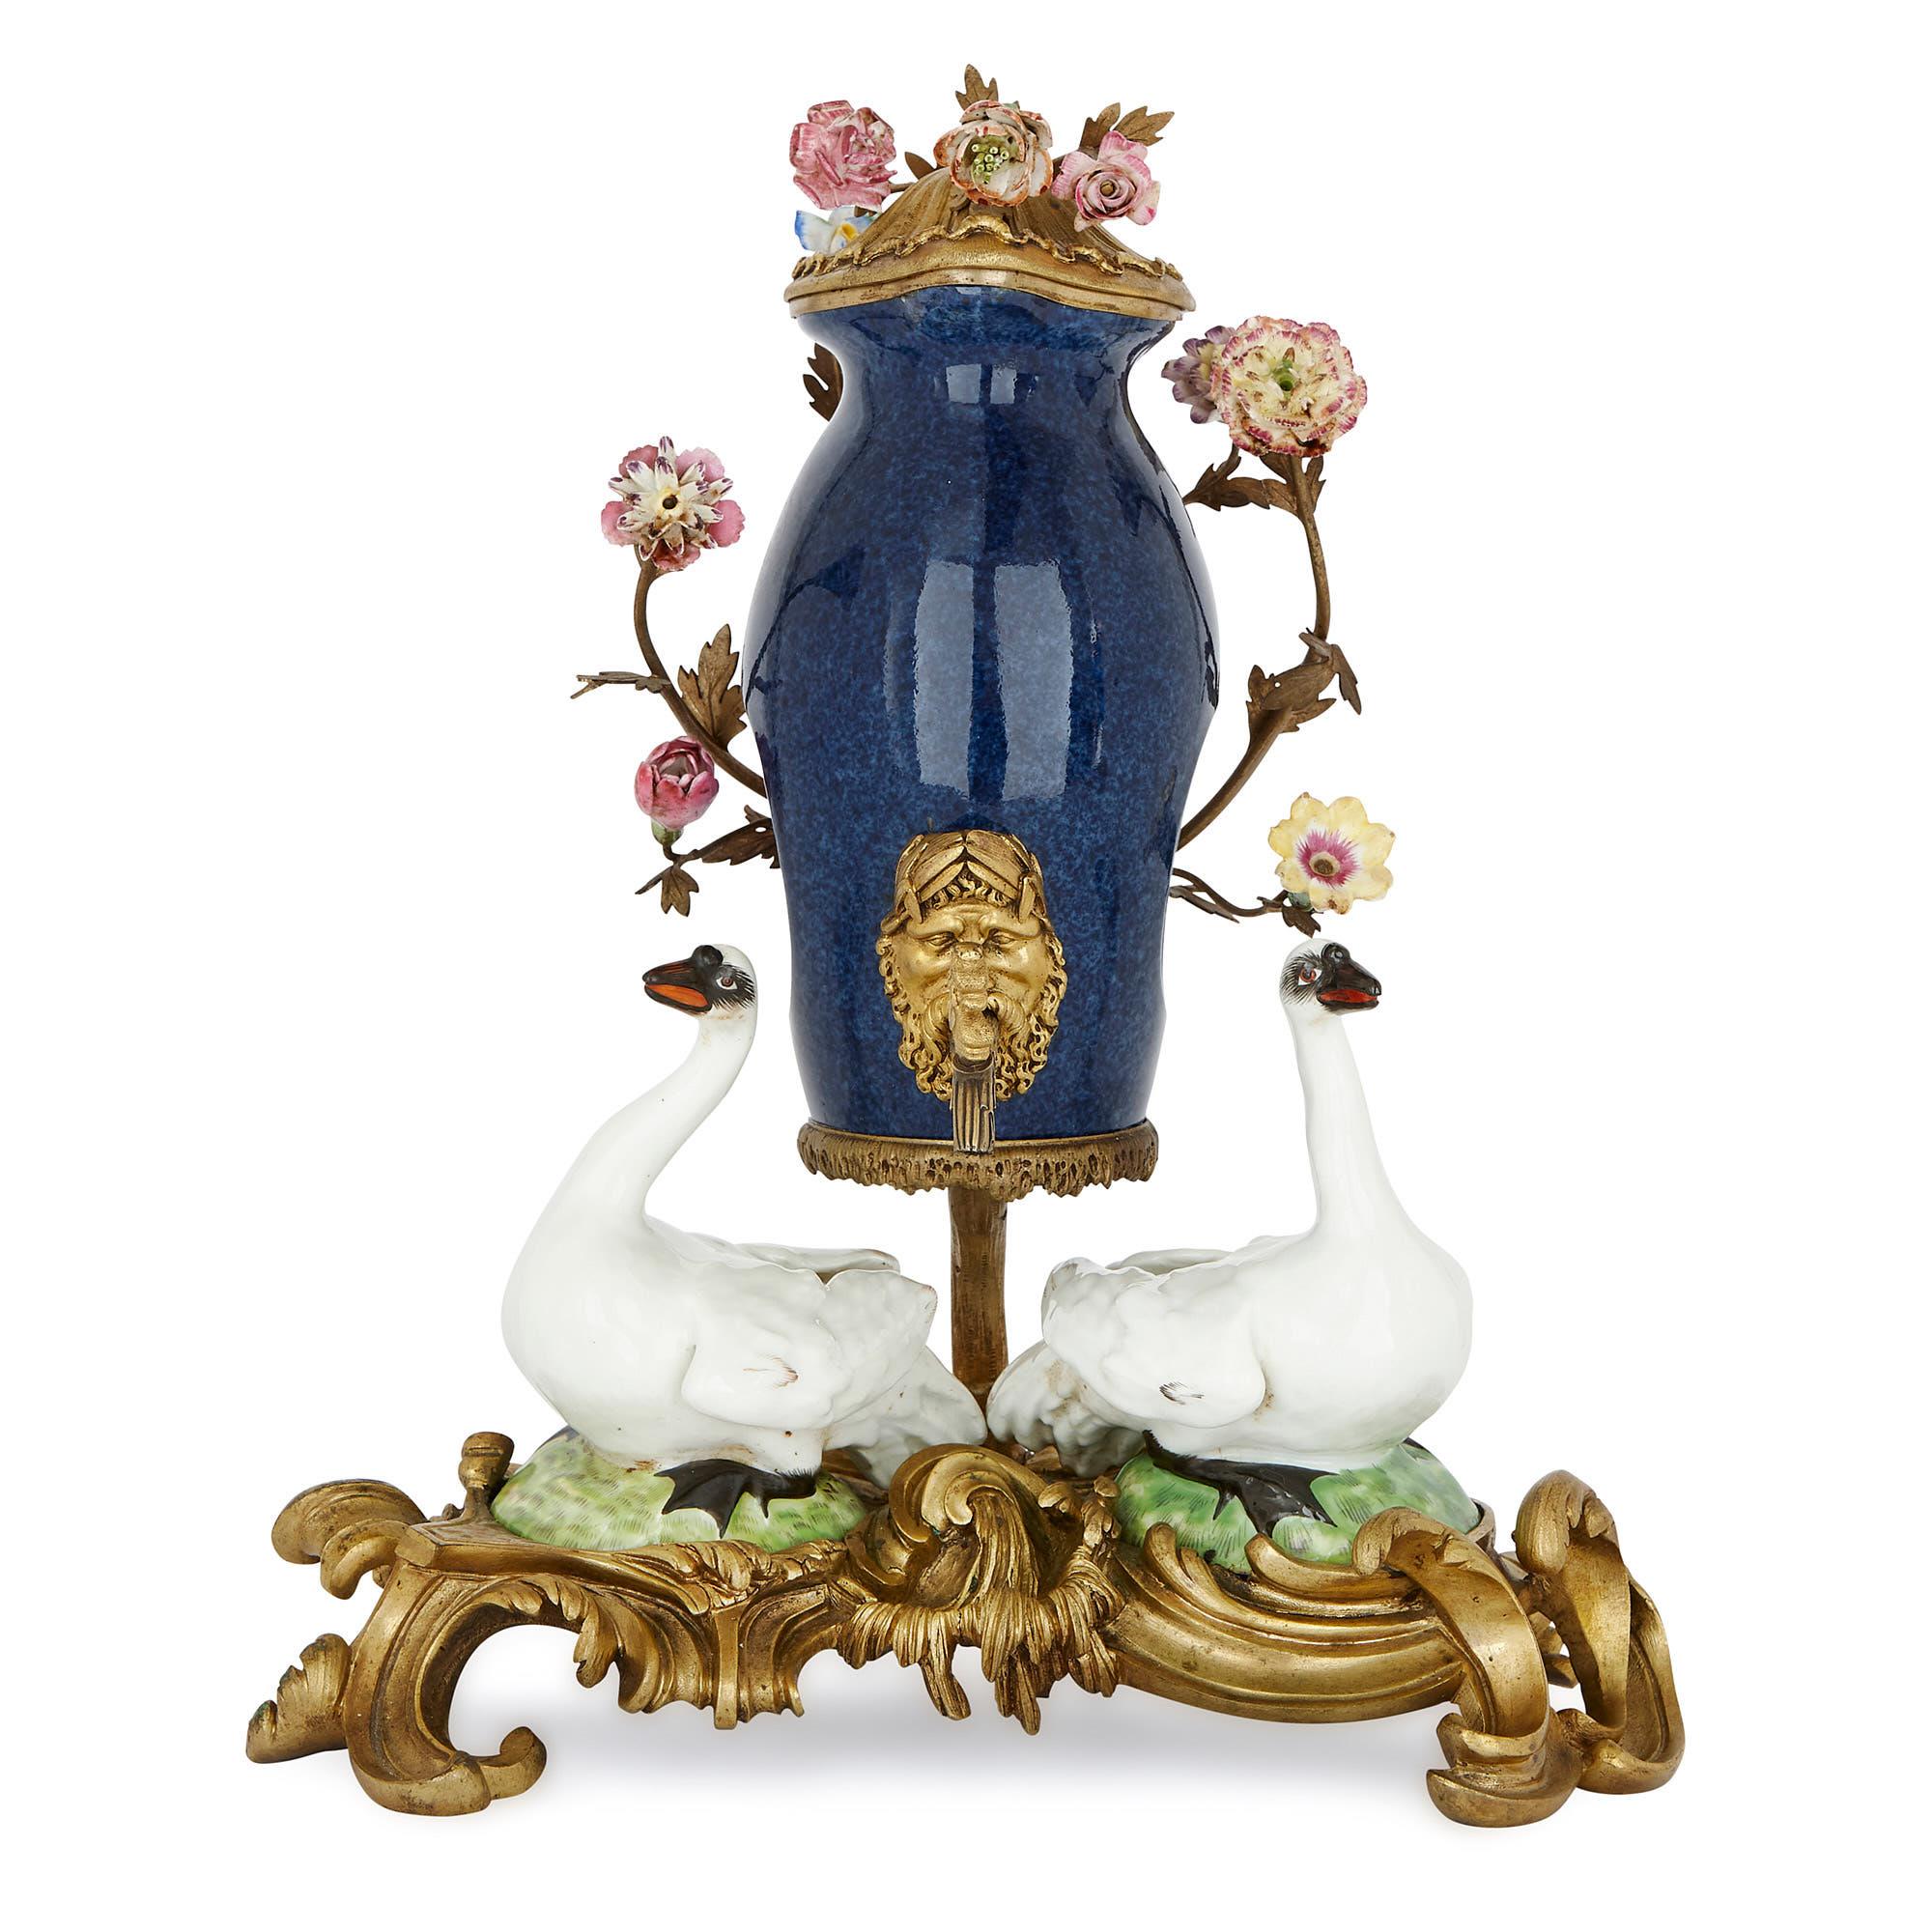 Meissen style porcelain and gilt bronze table fountain by Samson